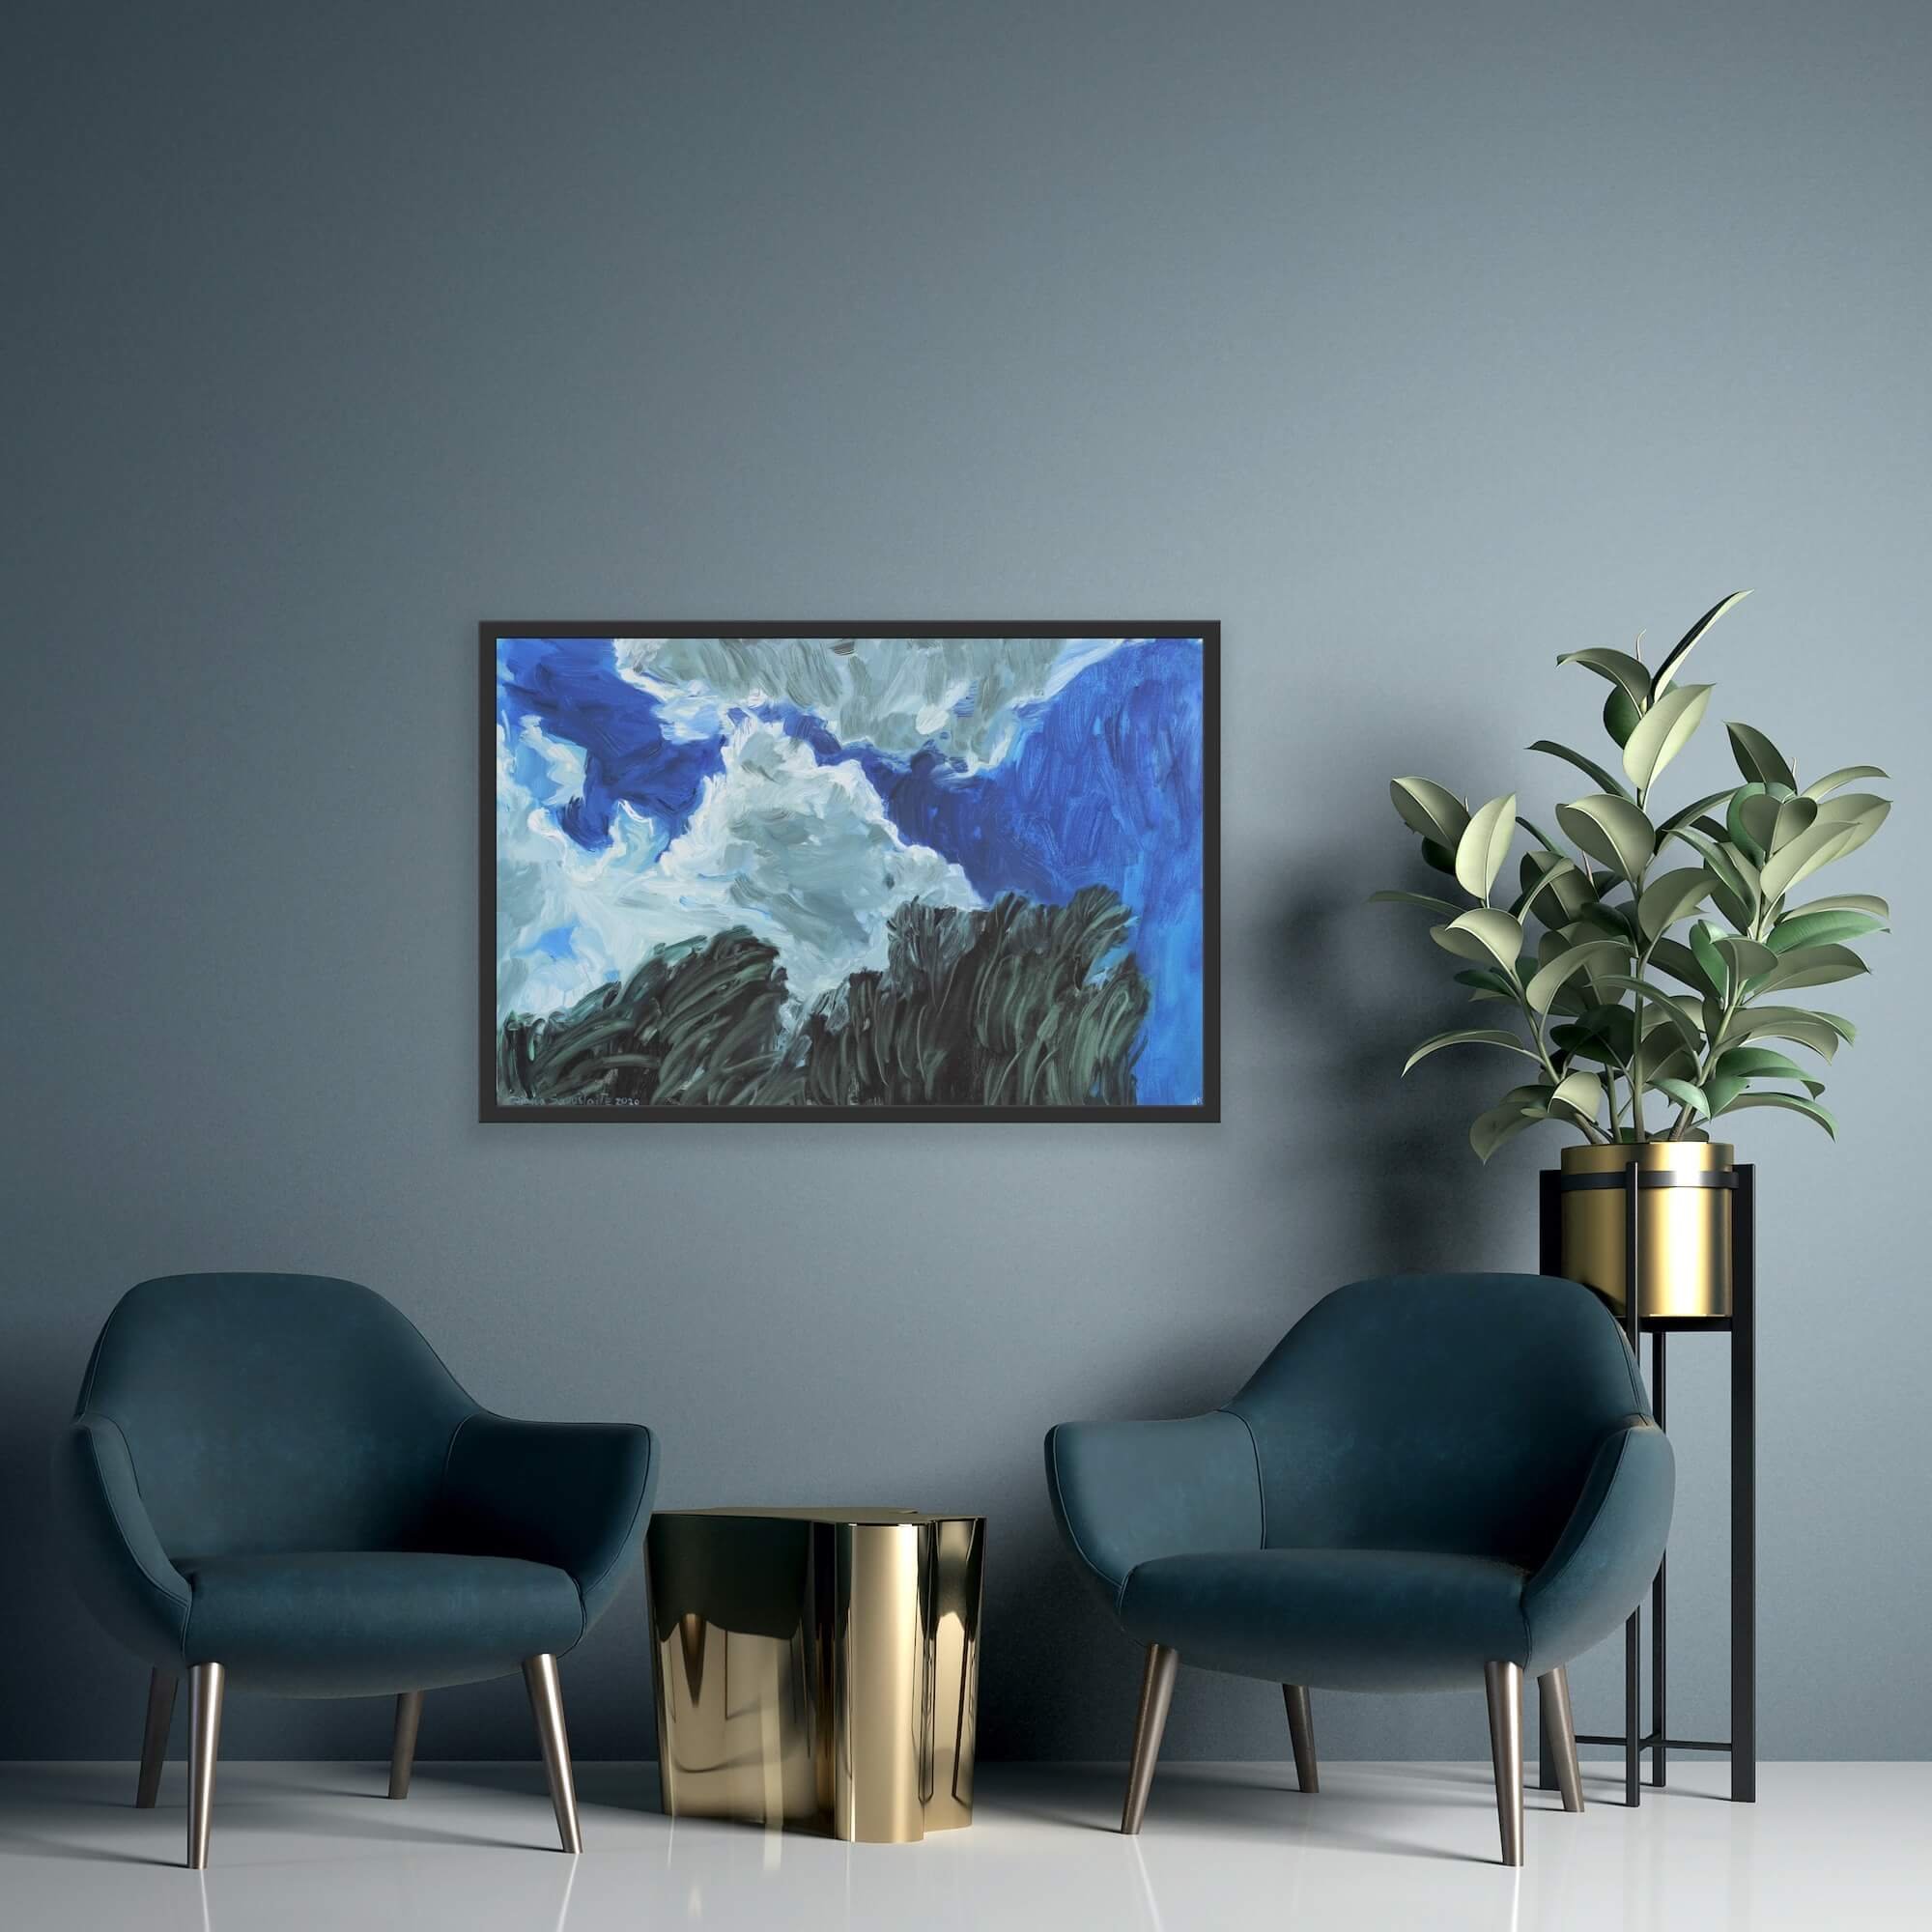 clouds-painting-in-interior.JPG